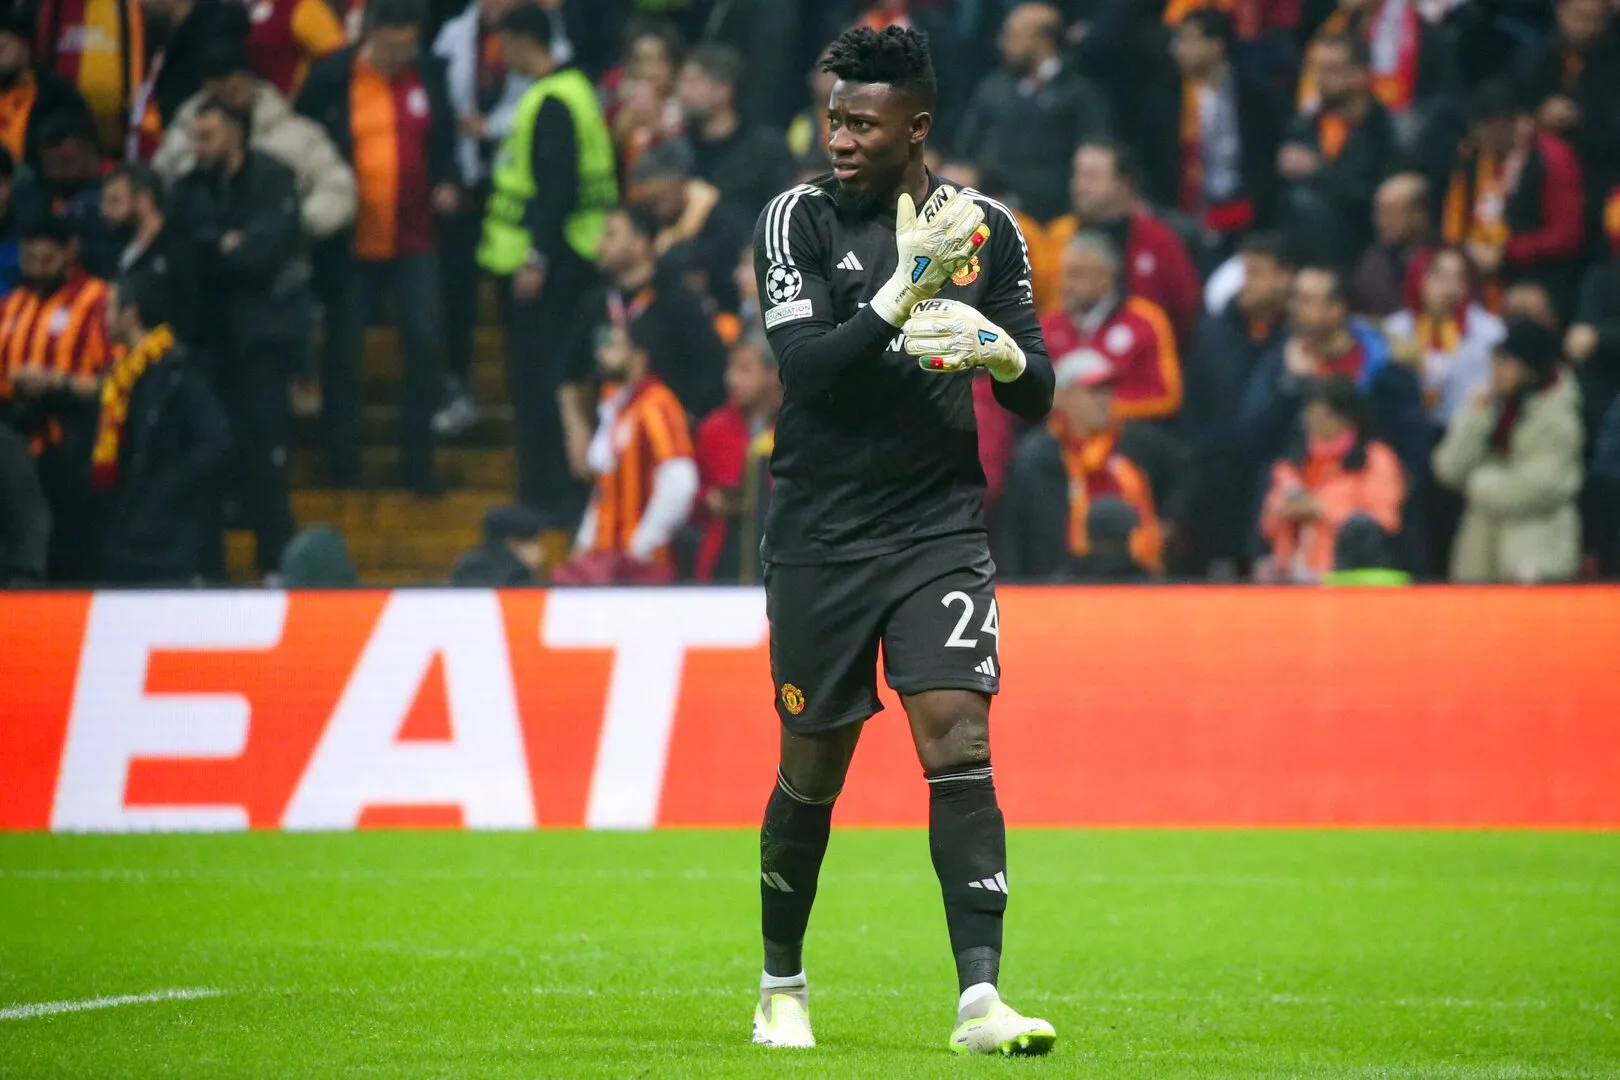 Andre Onana fears losing first spot at Manchester United if he leaves for AFCON with Cameroon